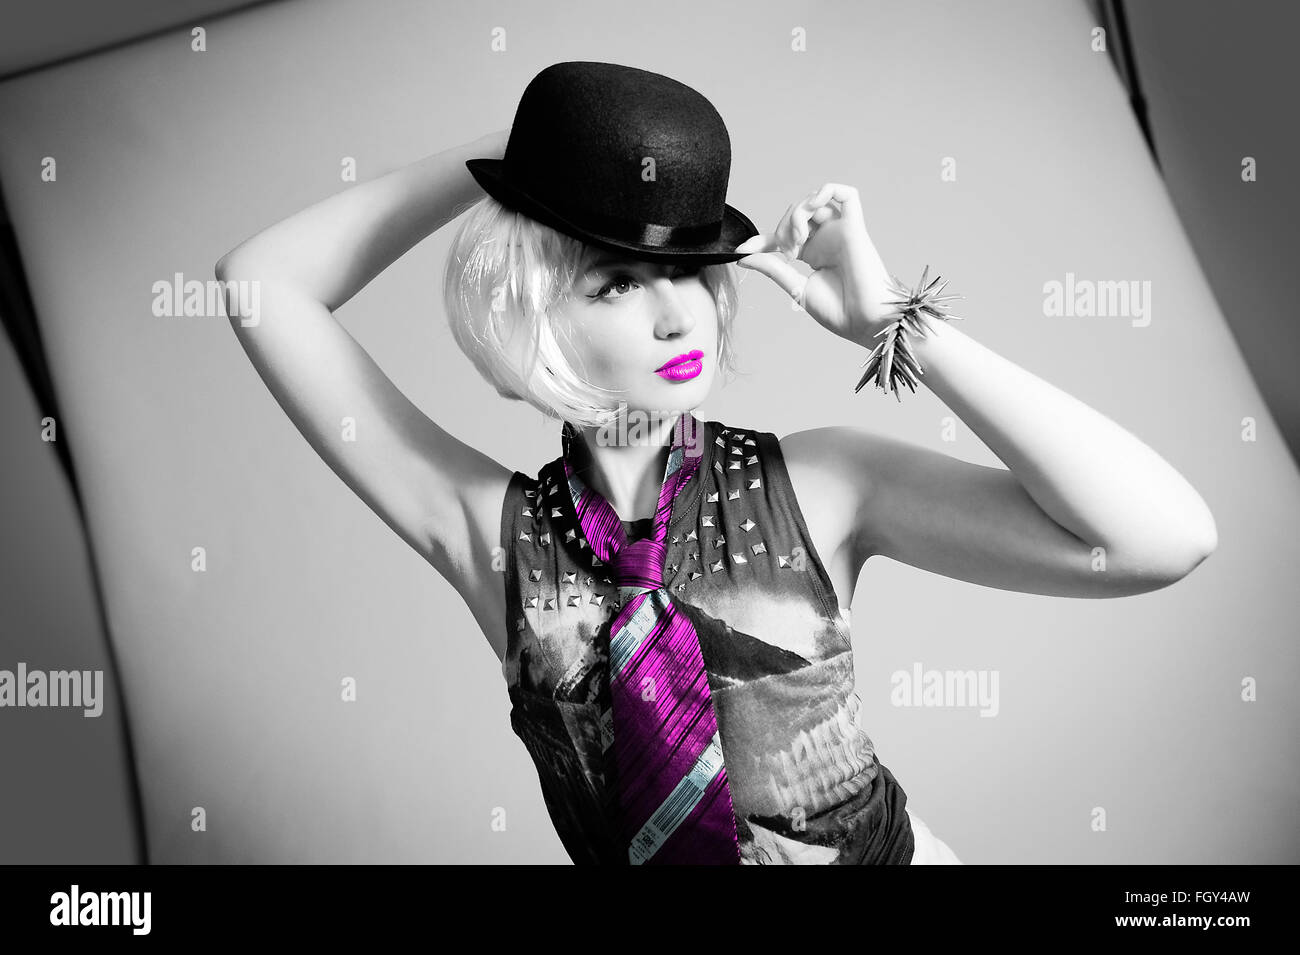 Girl cabaret dancing with black hat and color pop tie and lips Stock Photo